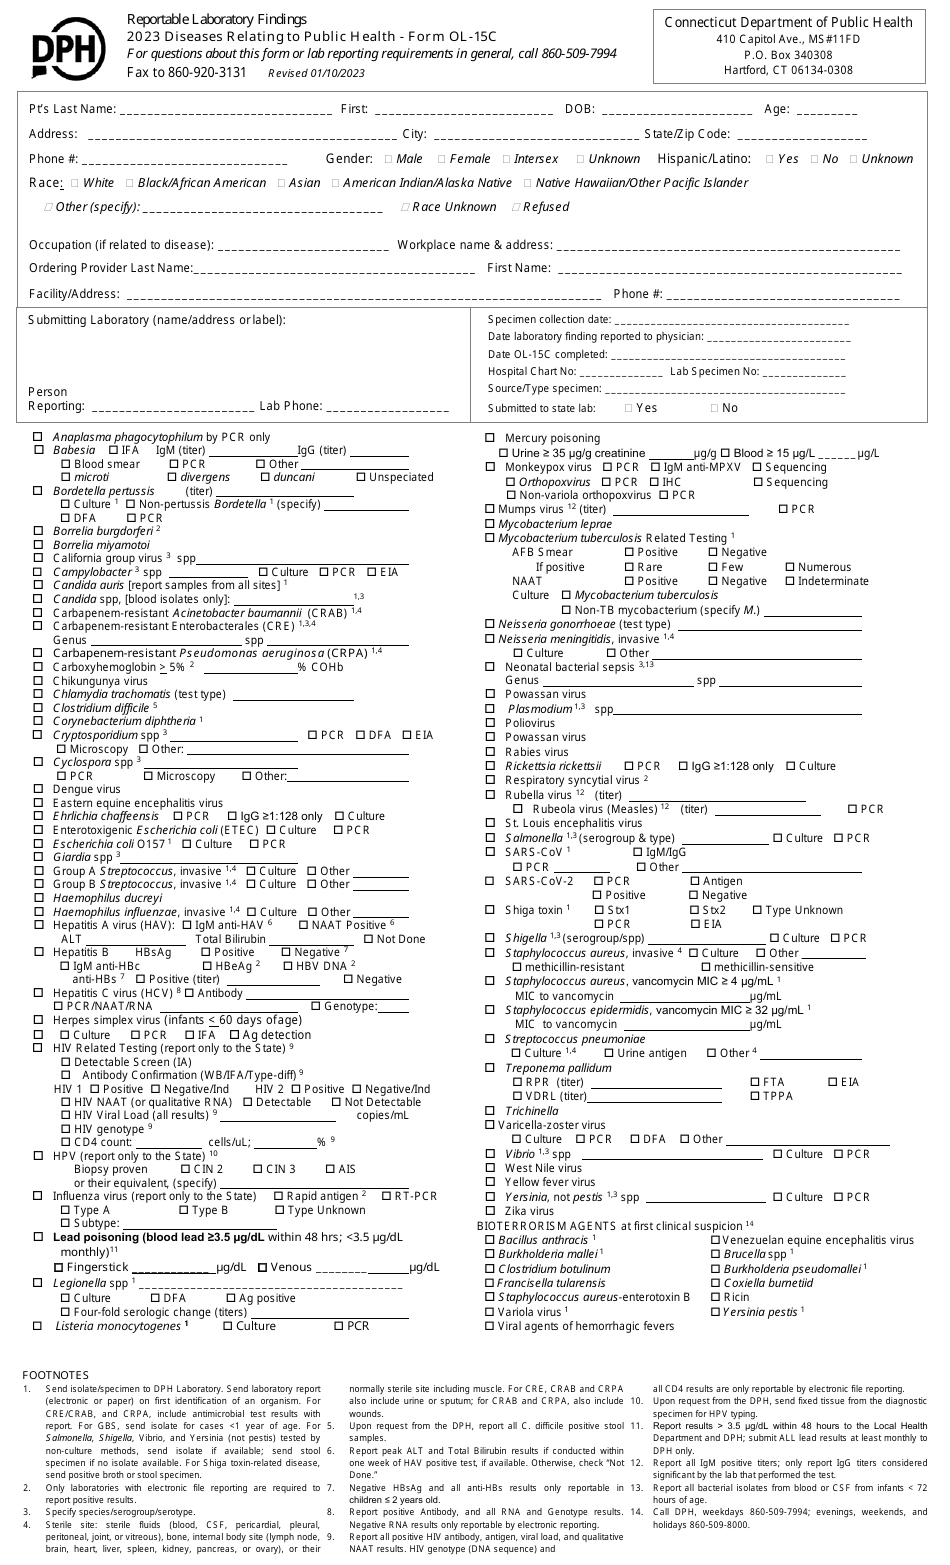 Form OL-15C Diseases Relating to Public Health - Connecticut, Page 1